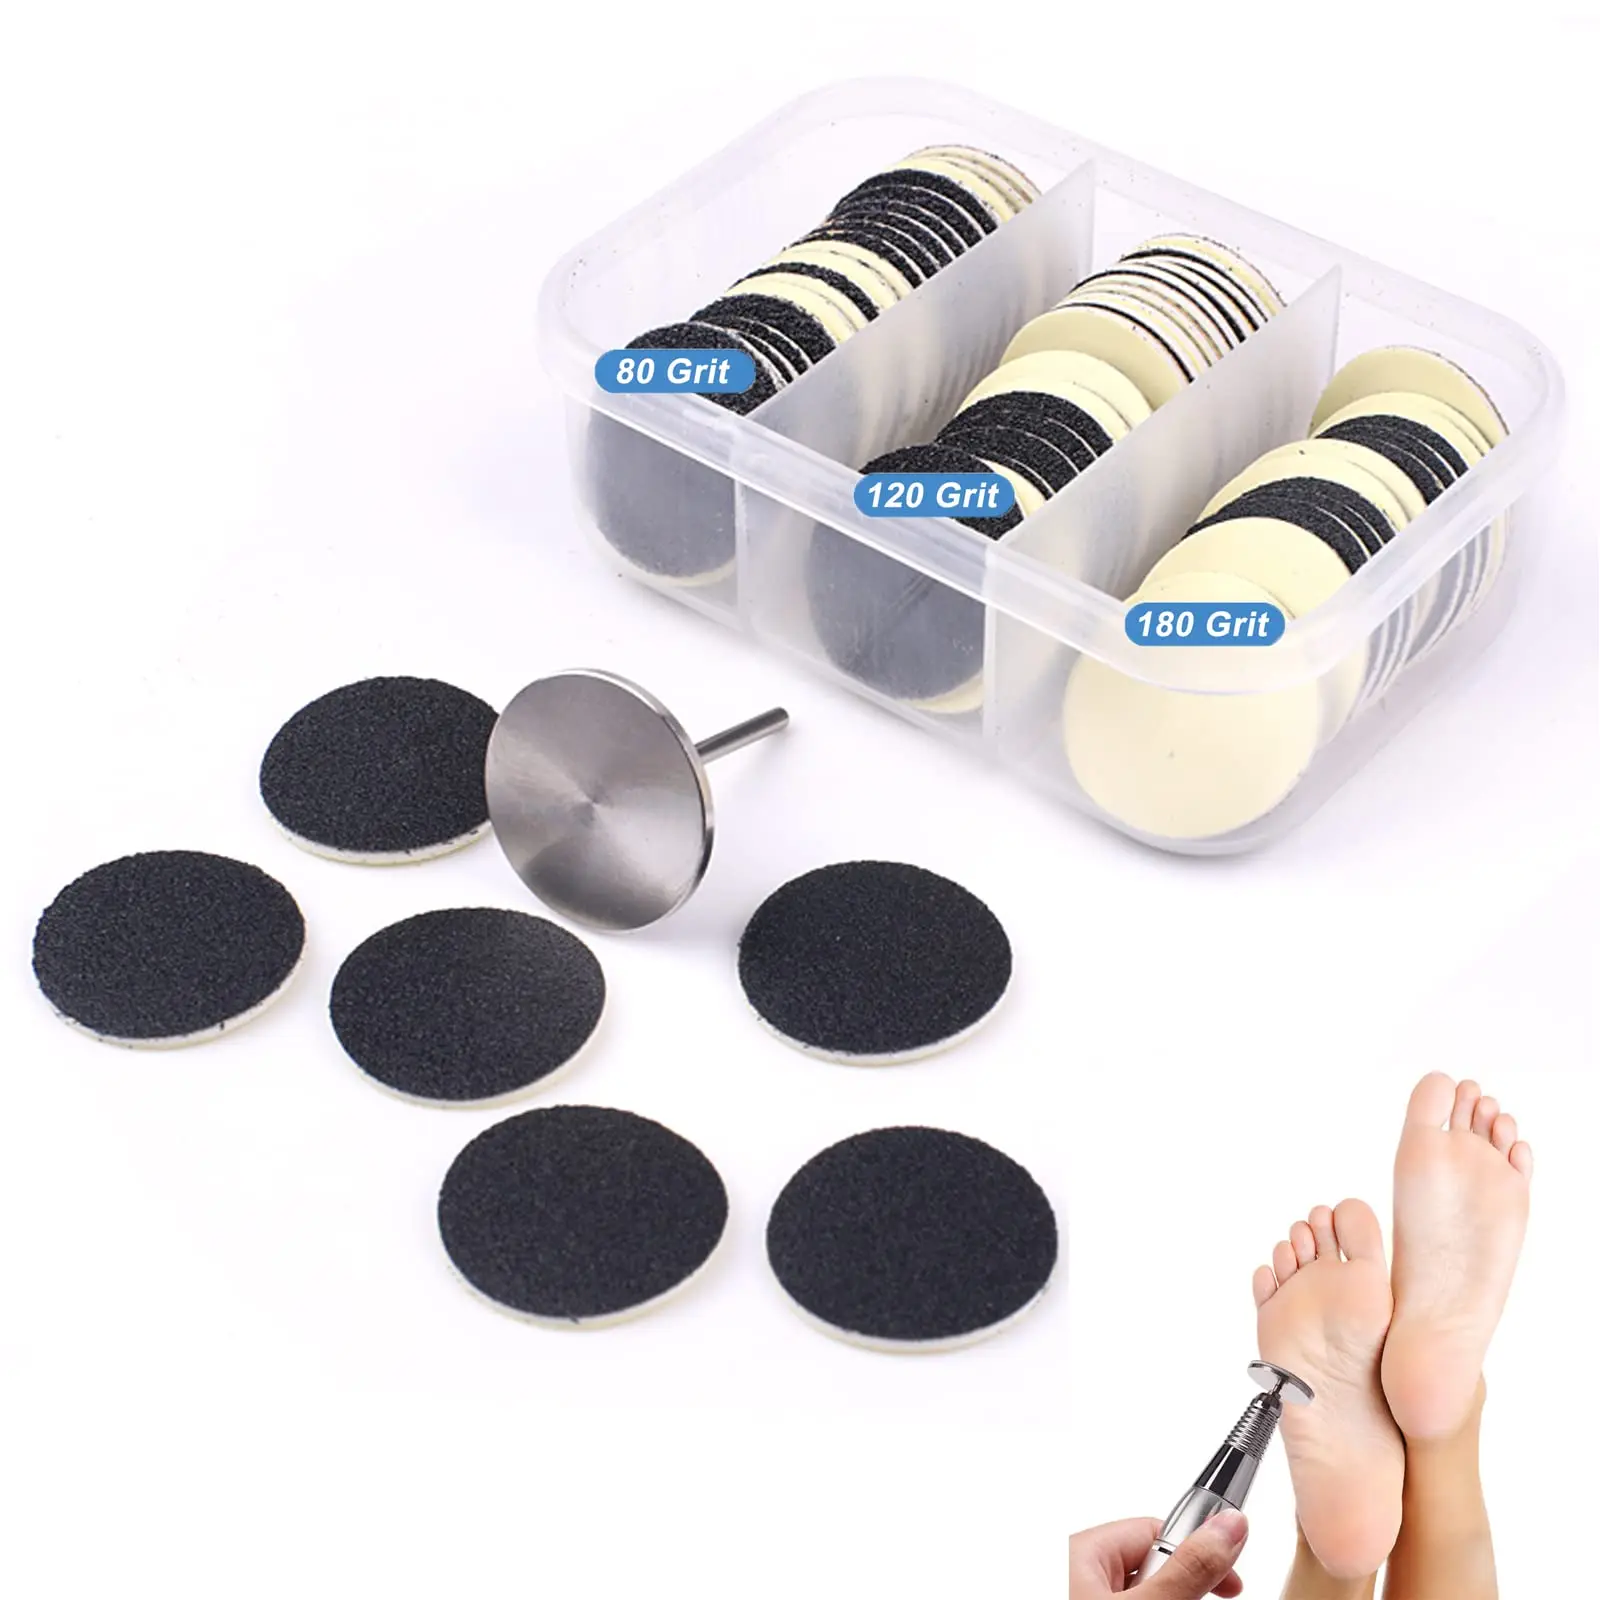 

Round Black Replaceable Sandpaper Refill Discs Pedicure File Easy Strip Peel Pads Refill for Electric Foot File Callus Remover